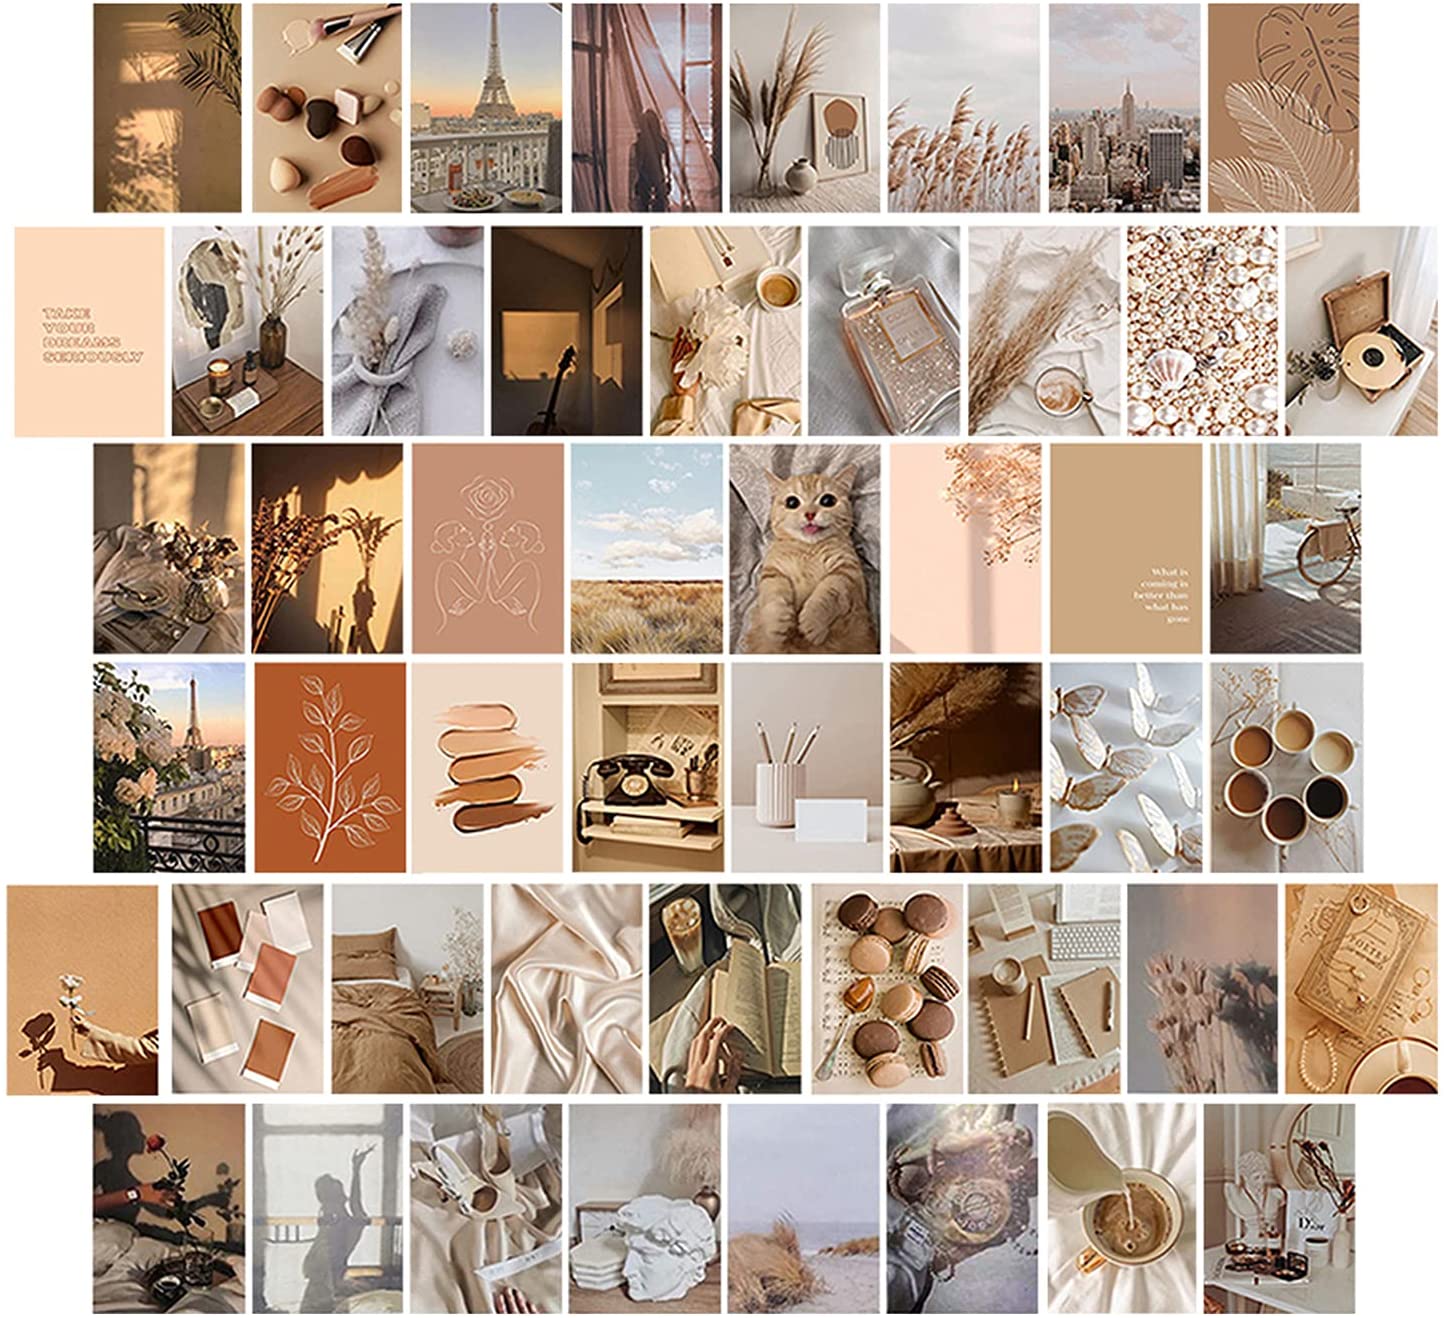 Buy Beige Boho Wall Collage Kit Aesthetic Picture, Cream Decor Boho Aesthetic Photo , Wall Decor Posters for Girls Bedroom Wall, Dorm Room Photo Collage Kit Wall Decor 4x6 Inches Online